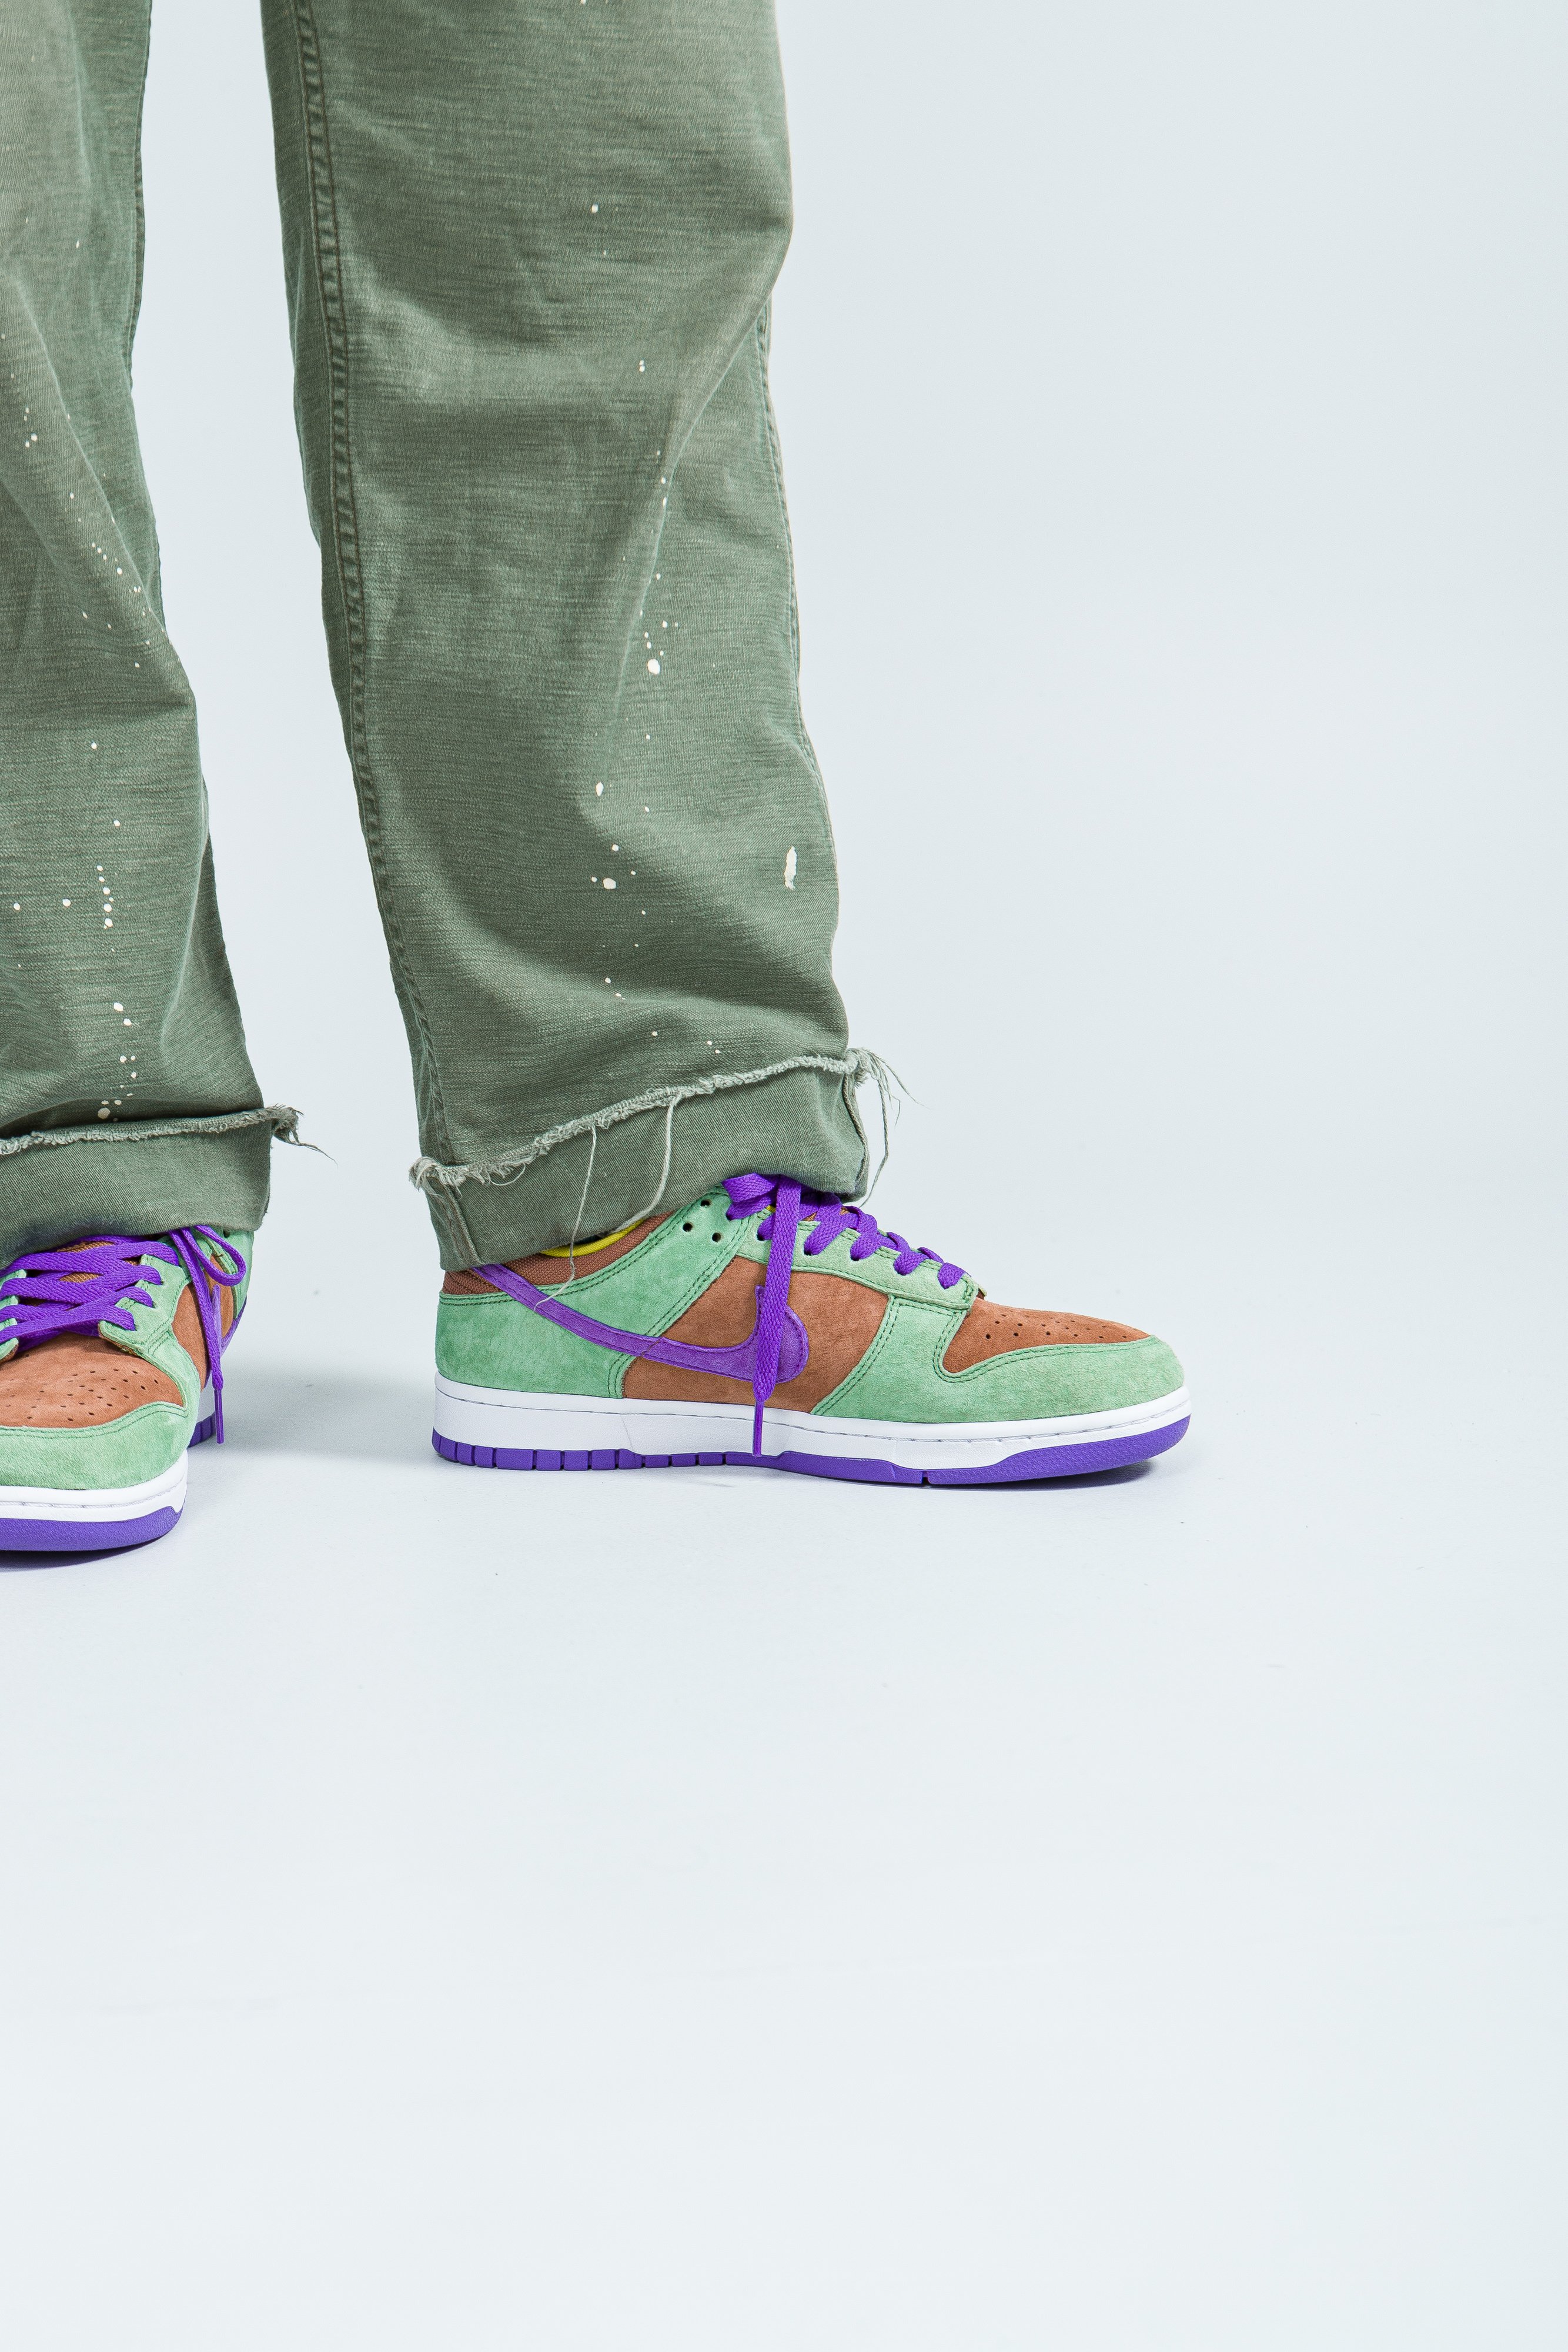 Up There Launches - Nike Dunk Low SP Ugly Duckling 'Veneer'